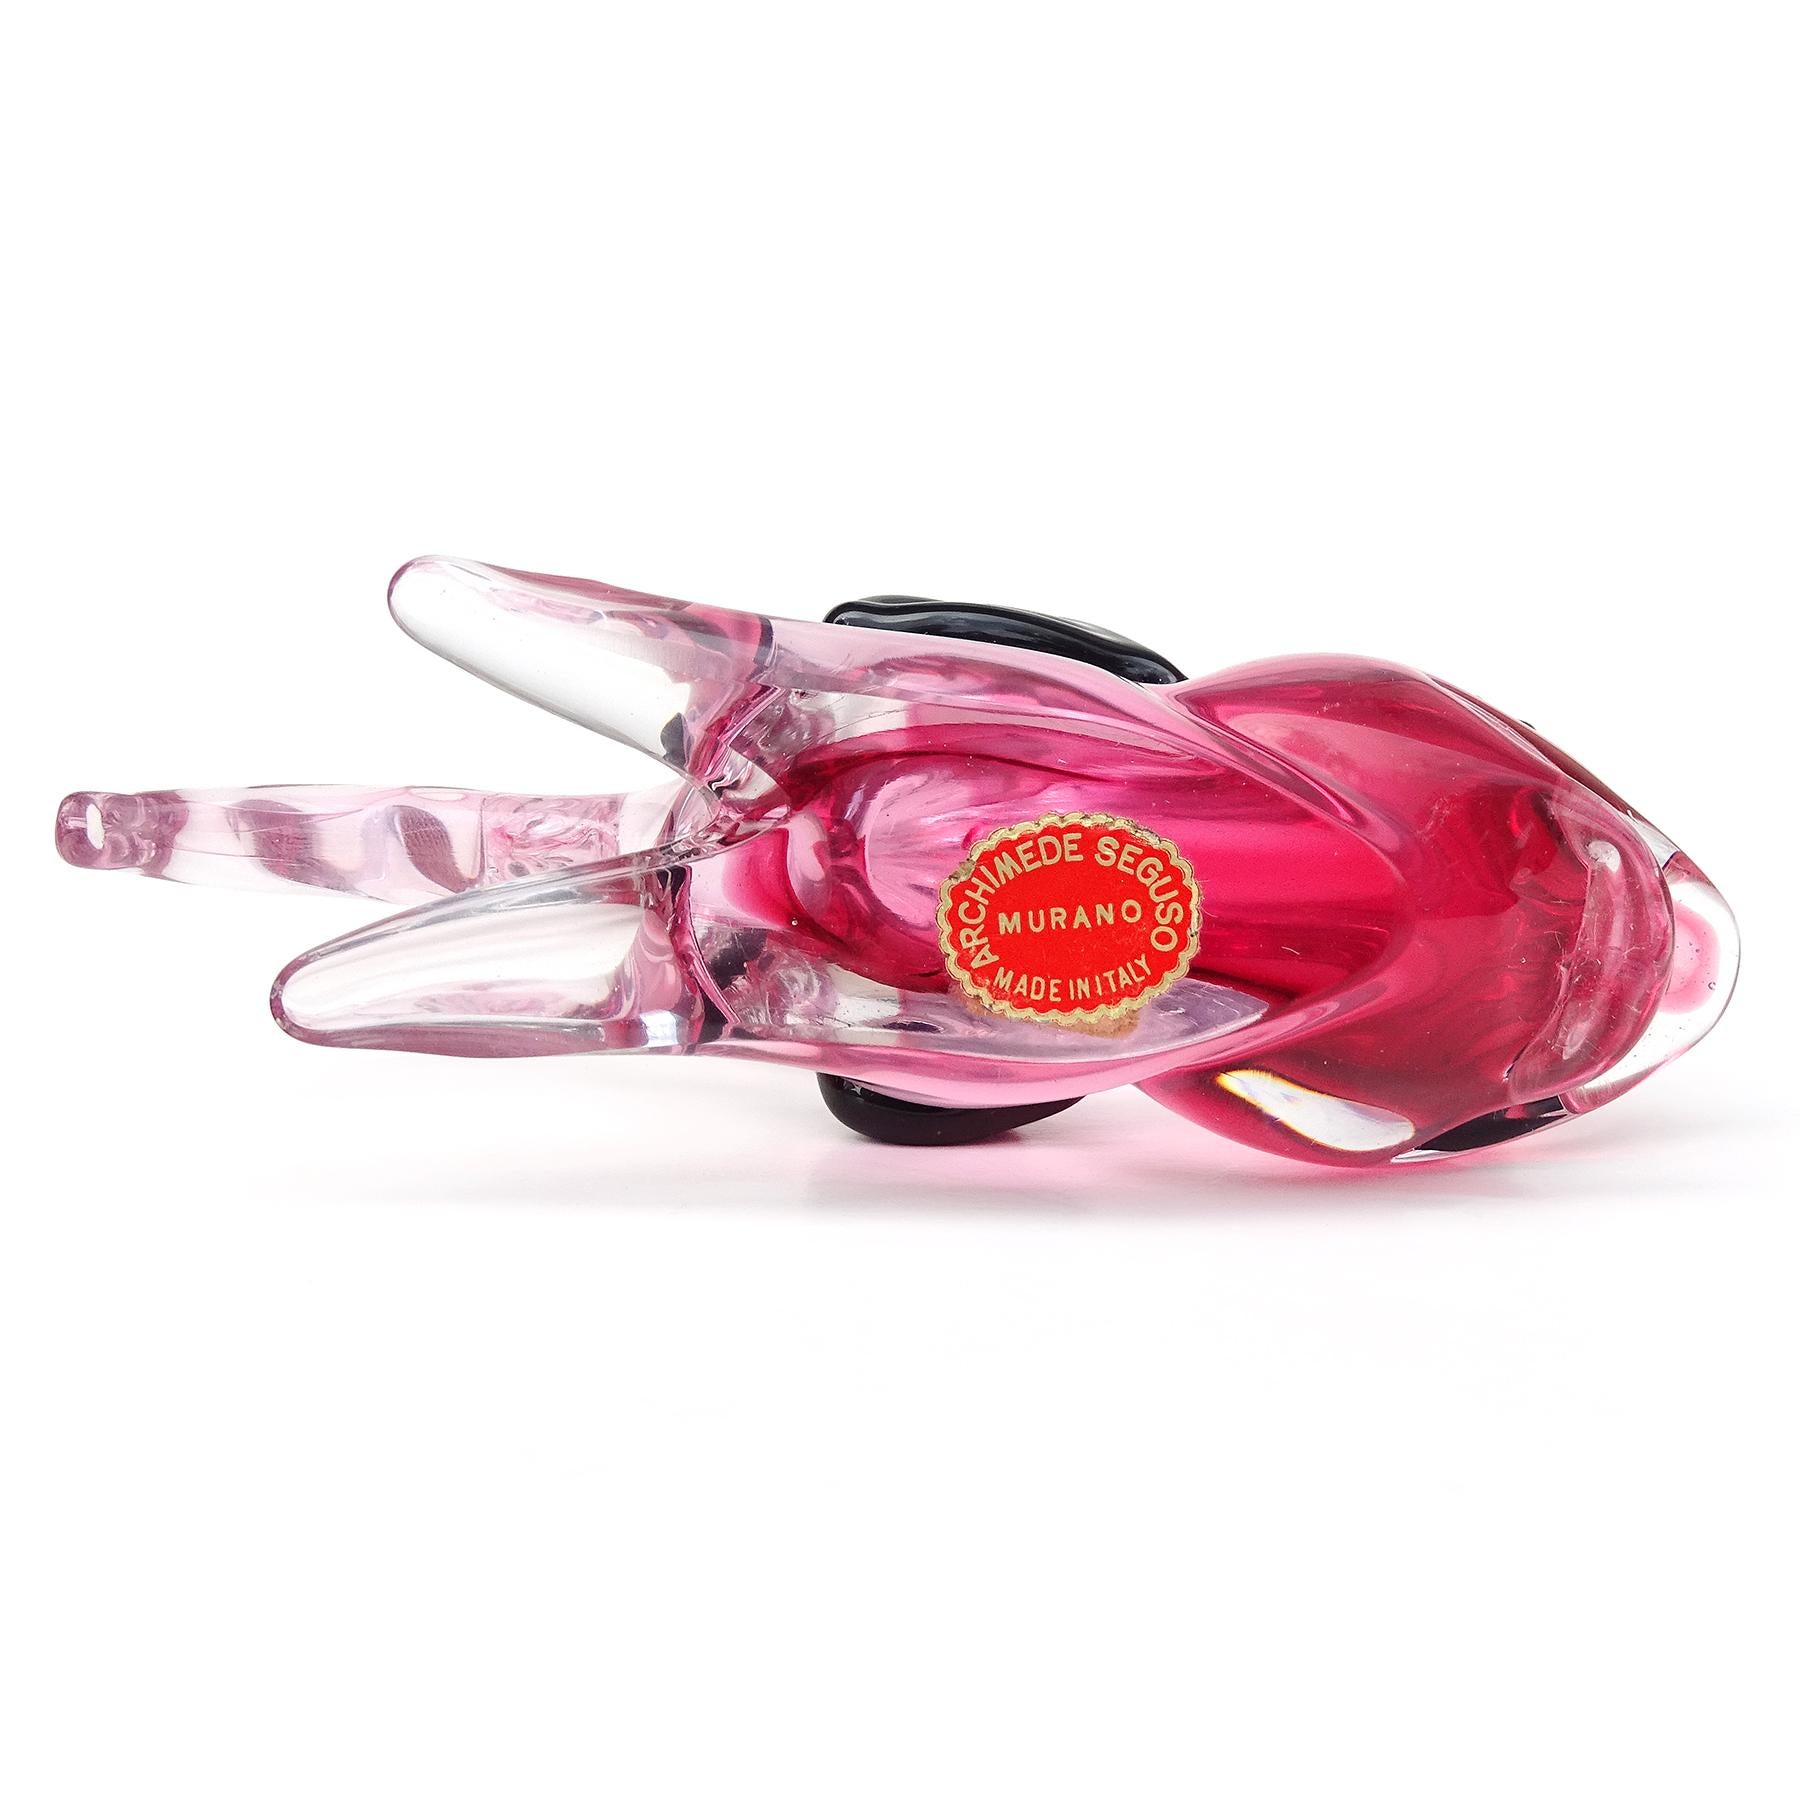 Hand-Crafted Seguso Murano Sommerso Pink Black Italian Art Glass Fish Figurine Paperweight For Sale